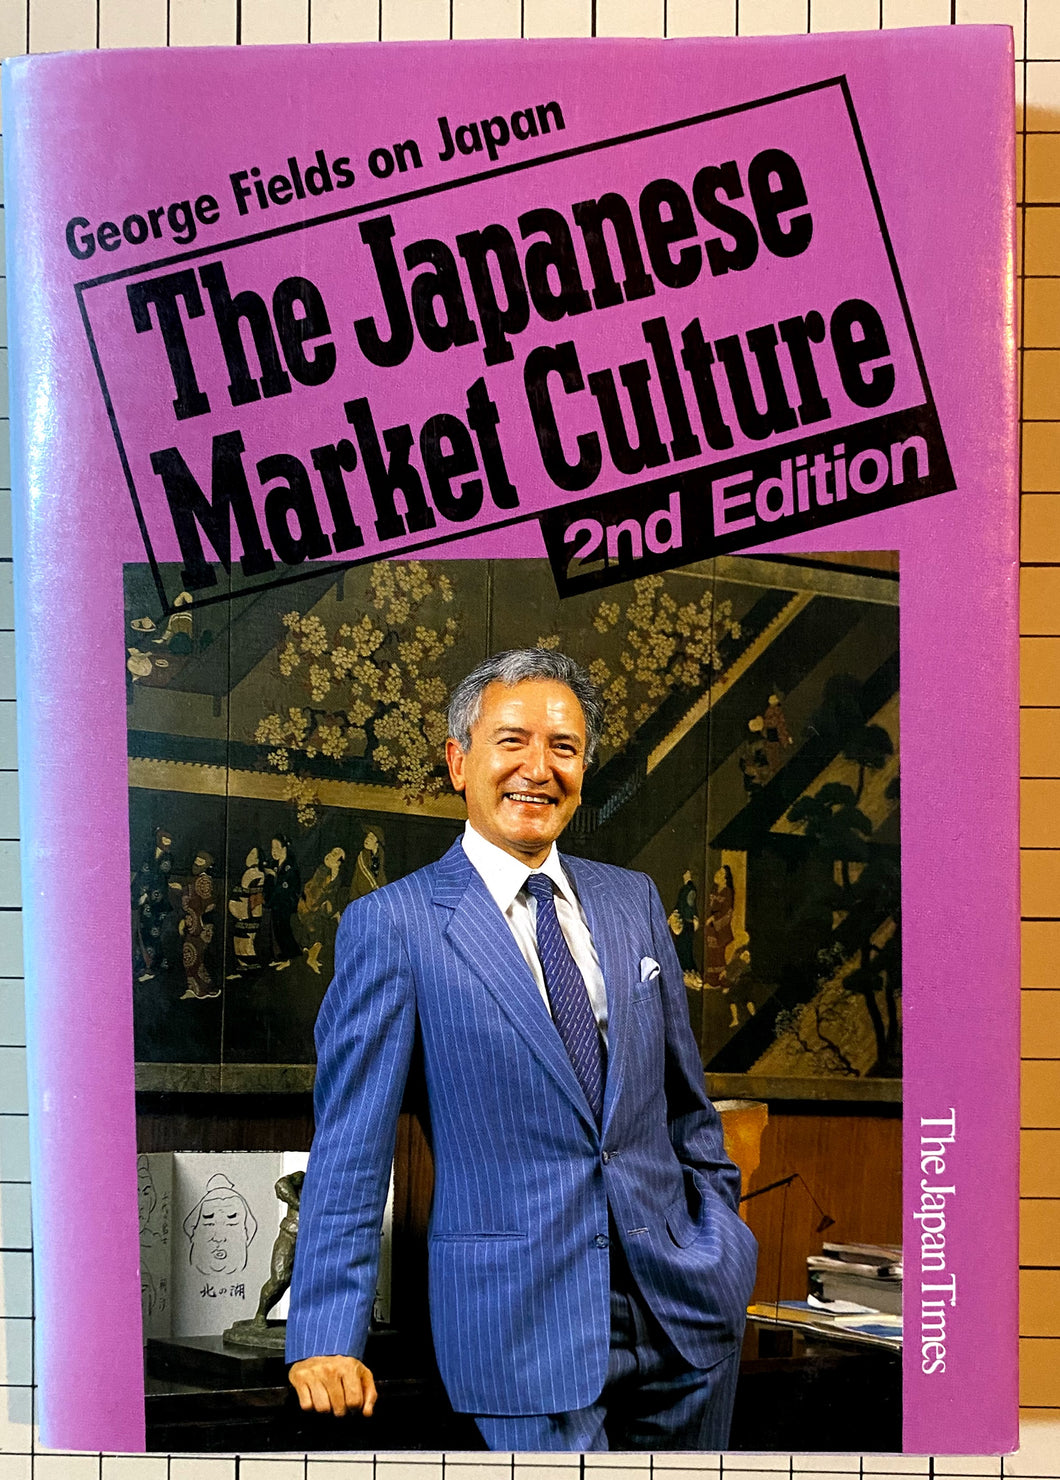 Japanese Market Culture Edition : George Fields